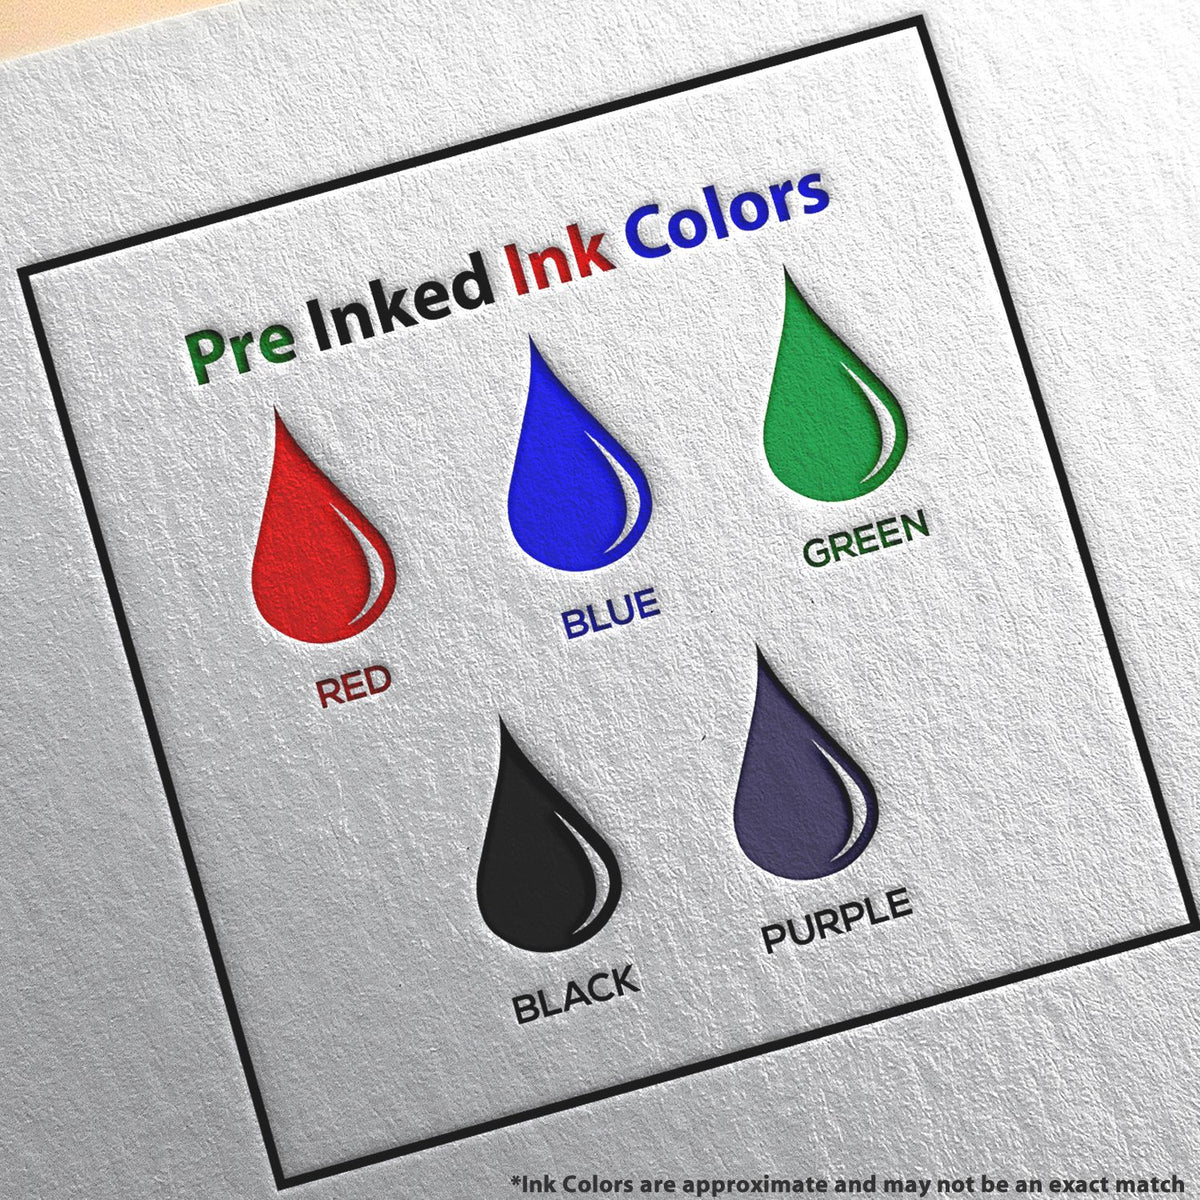 A picture showing the different ink colors or hues available for the Slim Pre-Inked New Hampshire Landscape Architect Seal Stamp product.